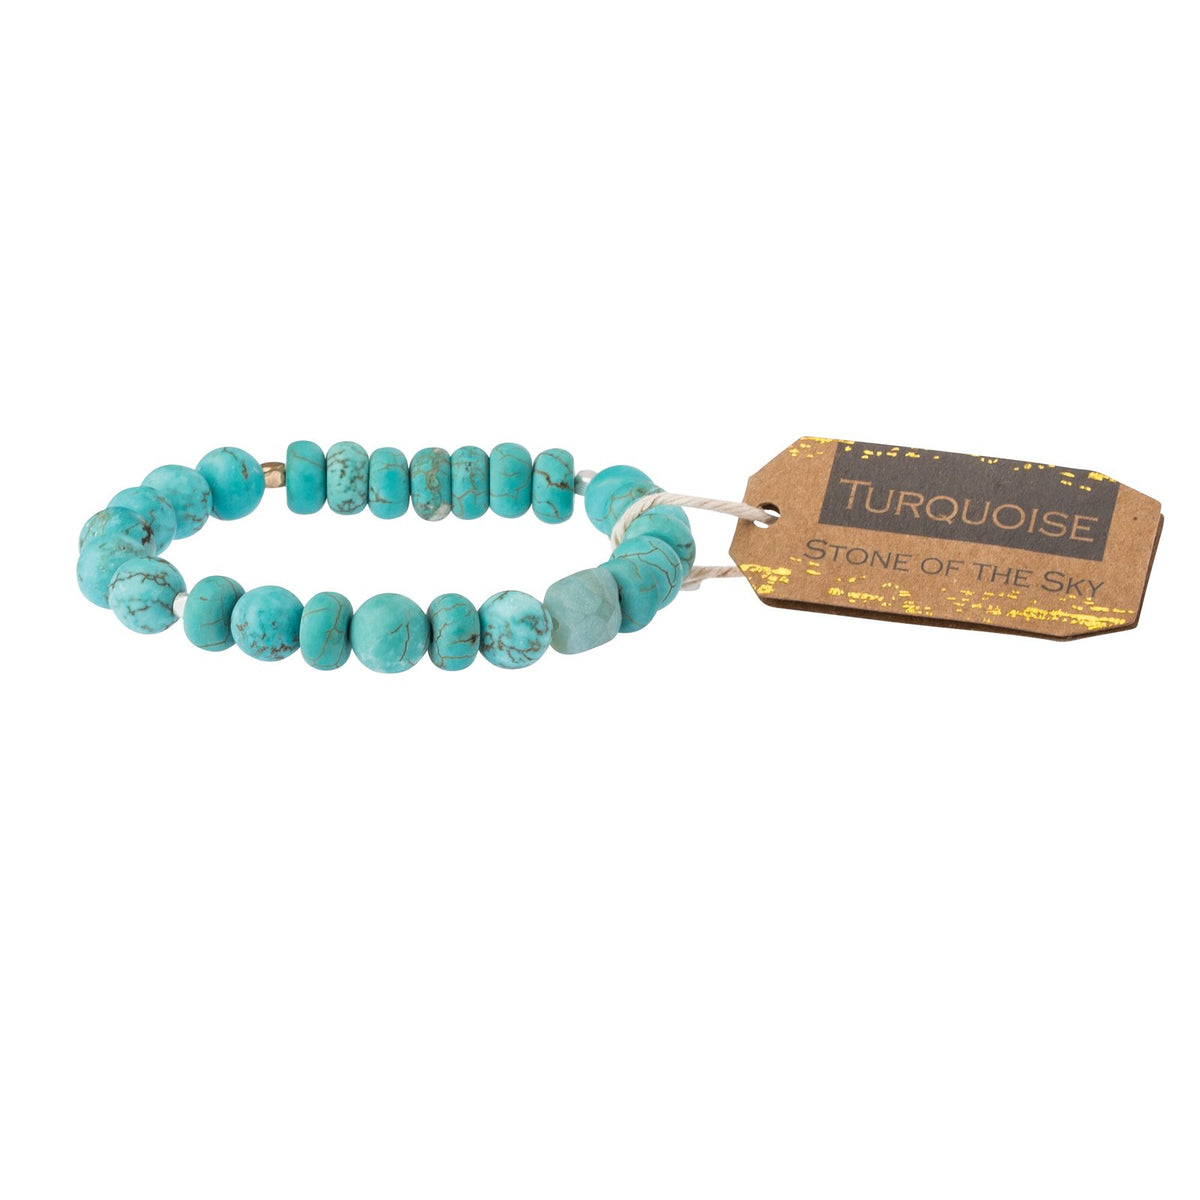 Stone Wrap Bracelet/Necklace - Turquoise/Silver - Stone of the Sky